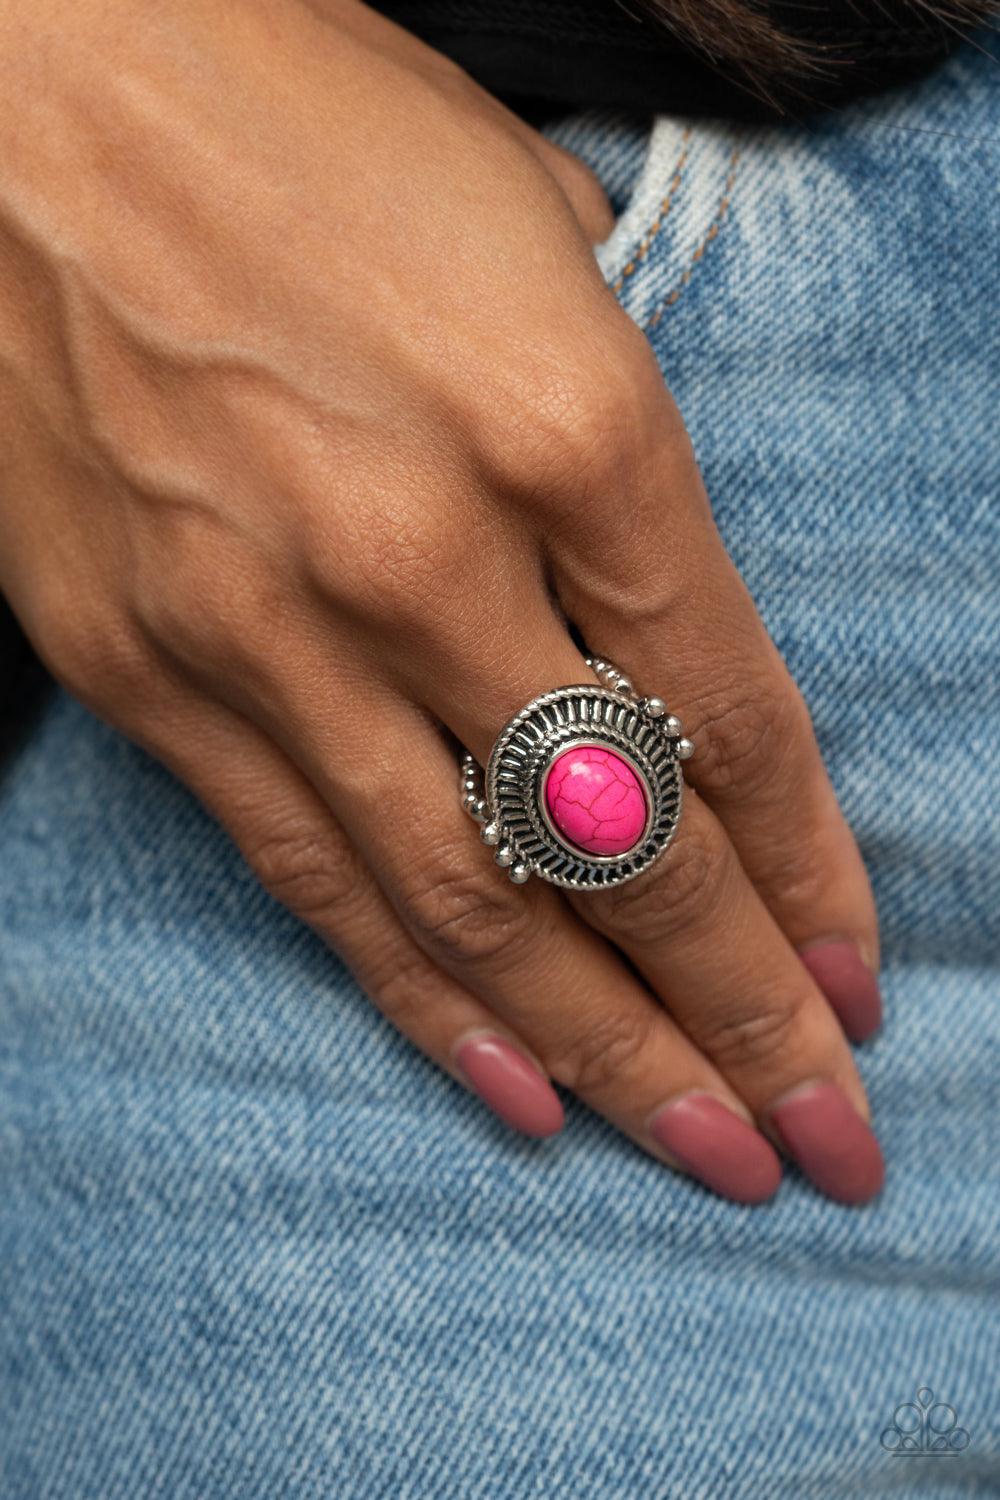   ​BADLANDS To The Bone Pink Ring - Jewelry by Bretta